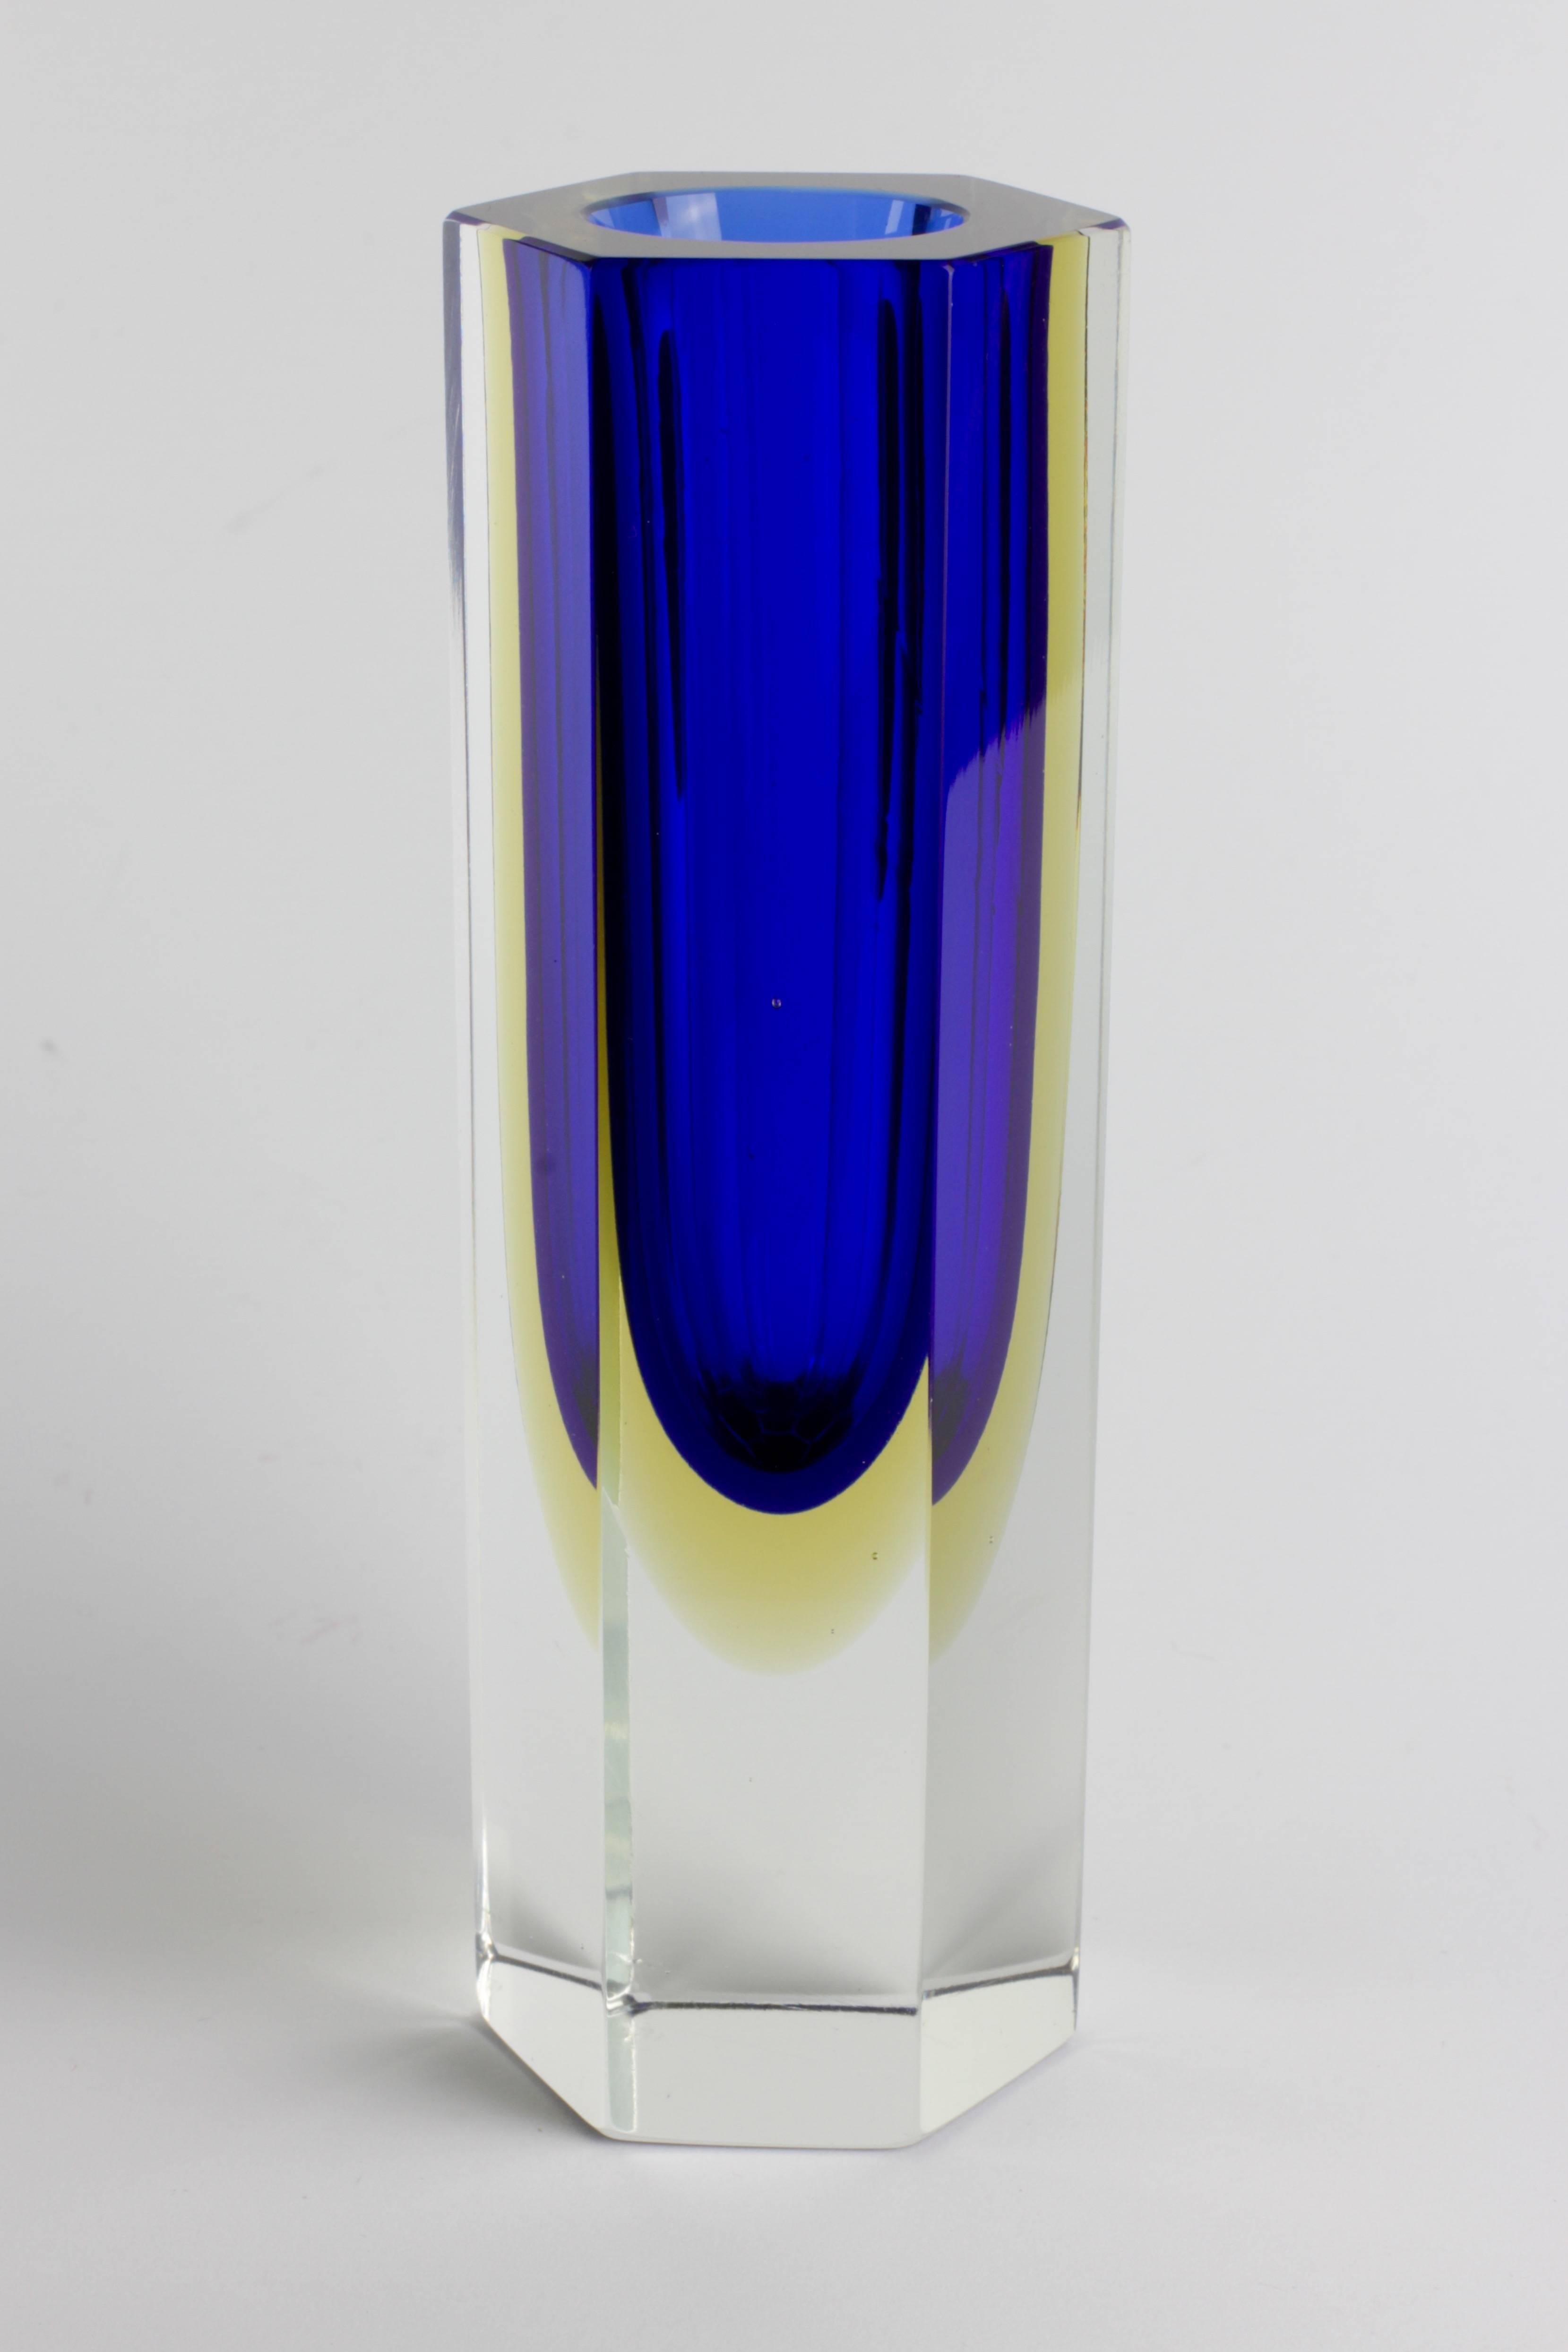 A gorgeous six sided faceted Murano glass vase attributed to Mandruzatto, circa 1960. An absolutely lovely colour combination of Saphire blue to pale yellow to clear 'Sommerso' or 'Submerged' glass technique.

Take a look through our 1stdibs store